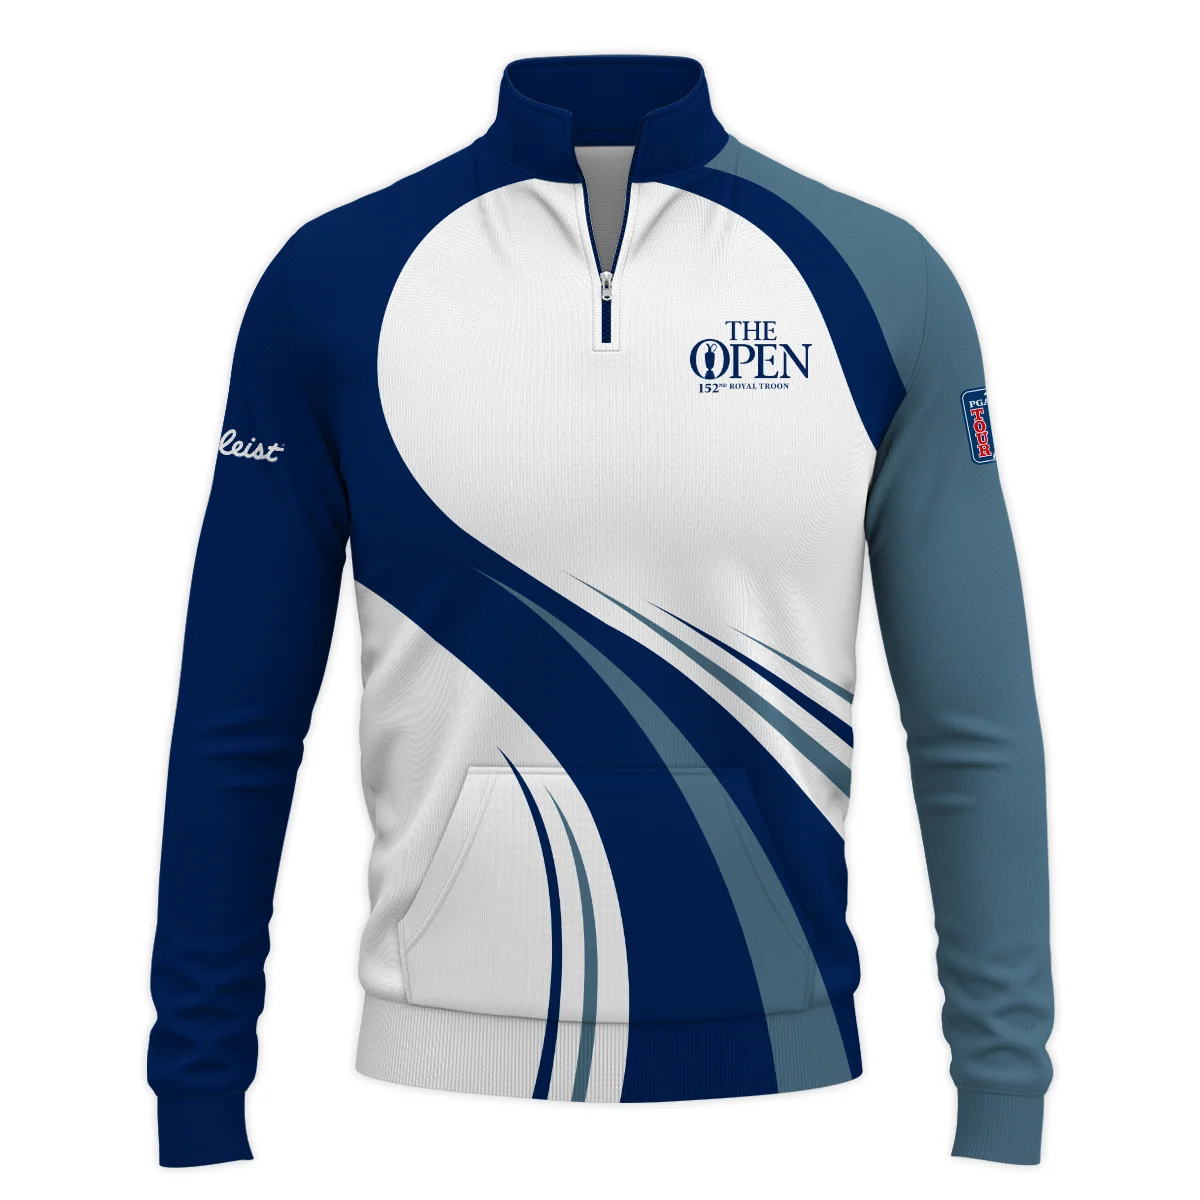 152nd Open Championship Titleist White Mostly Desaturated Dark Blue Quarter-Zip Jacket All Over Prints HOTOP270624A02TLSWZ